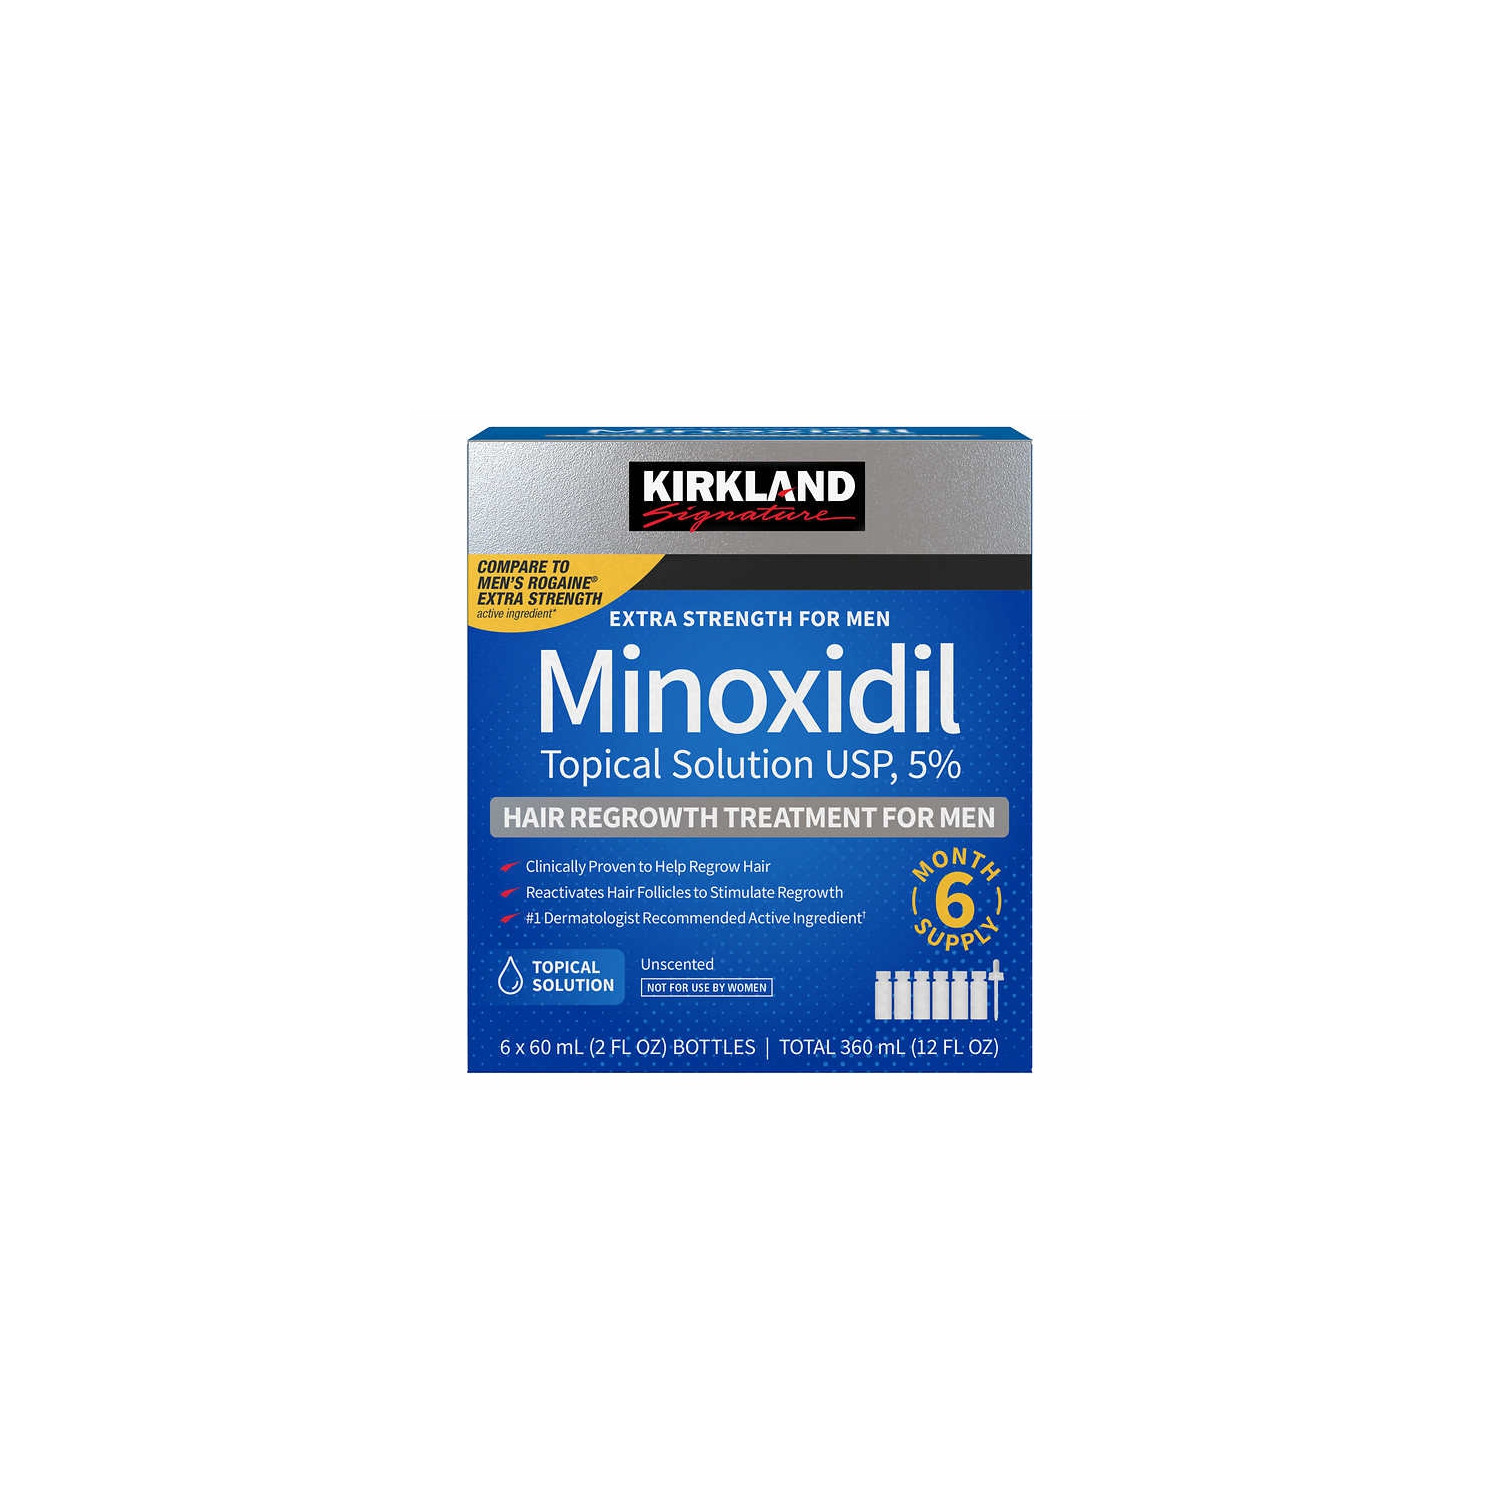 Kirkland Minoxidil 5% Extra Strength Hair Regrowth for MEN, 6 units x 60 mL (2 FL OZ) 6-Month Supply (Not for use by Women)